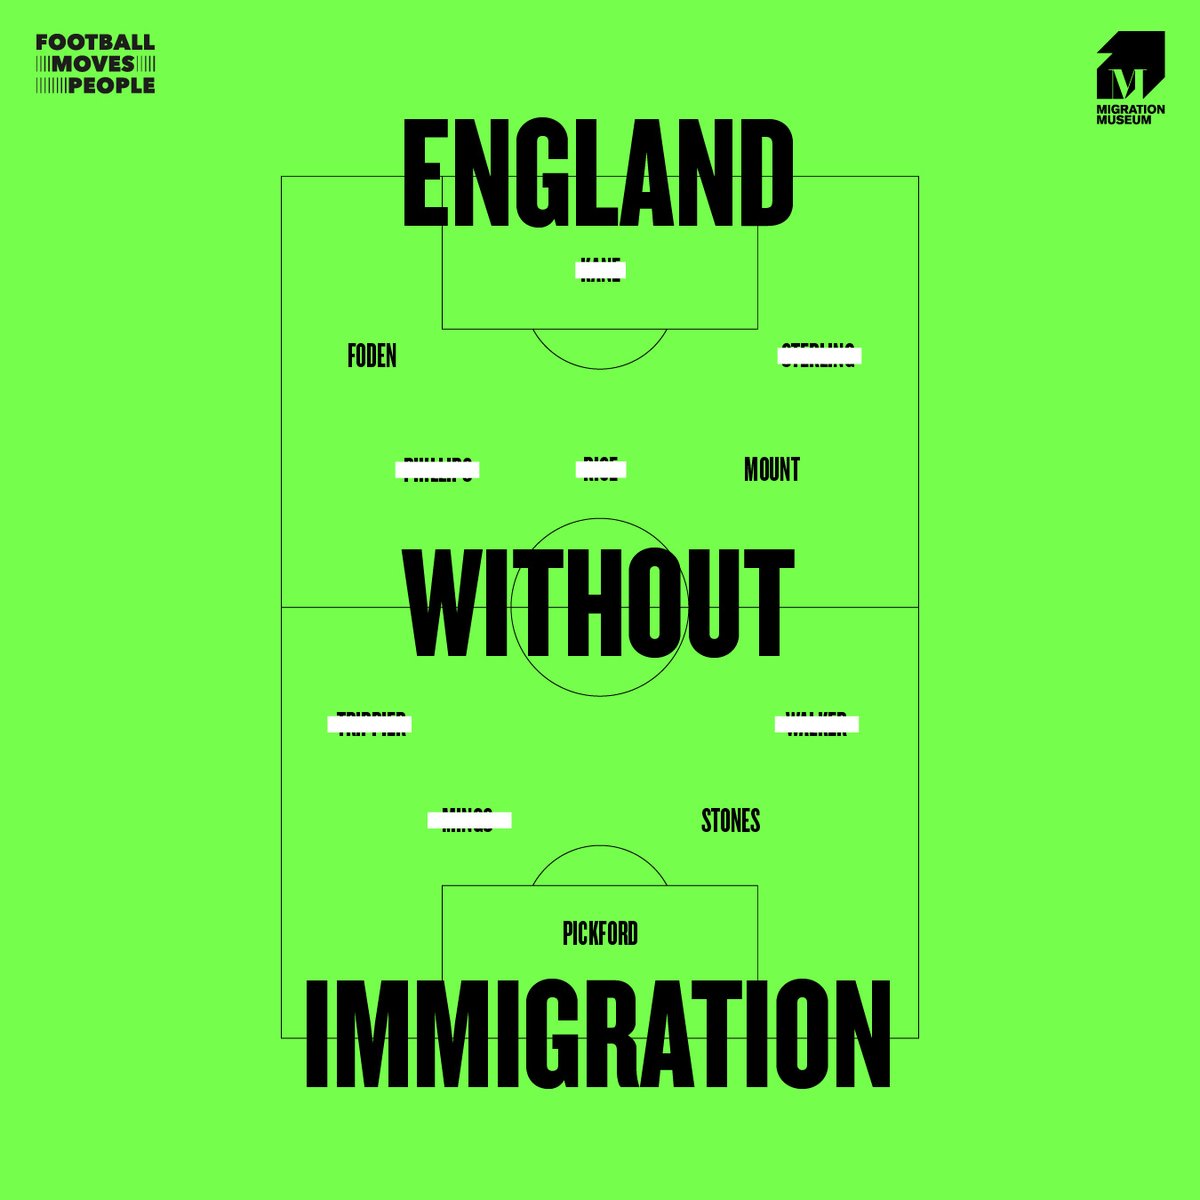 Find out how migration has shaped more than just #England's starting line-up: ow.ly/BDIf50F9995 #FootballMovesPeople #ENGCRO #Euro2020 #ThreeLions